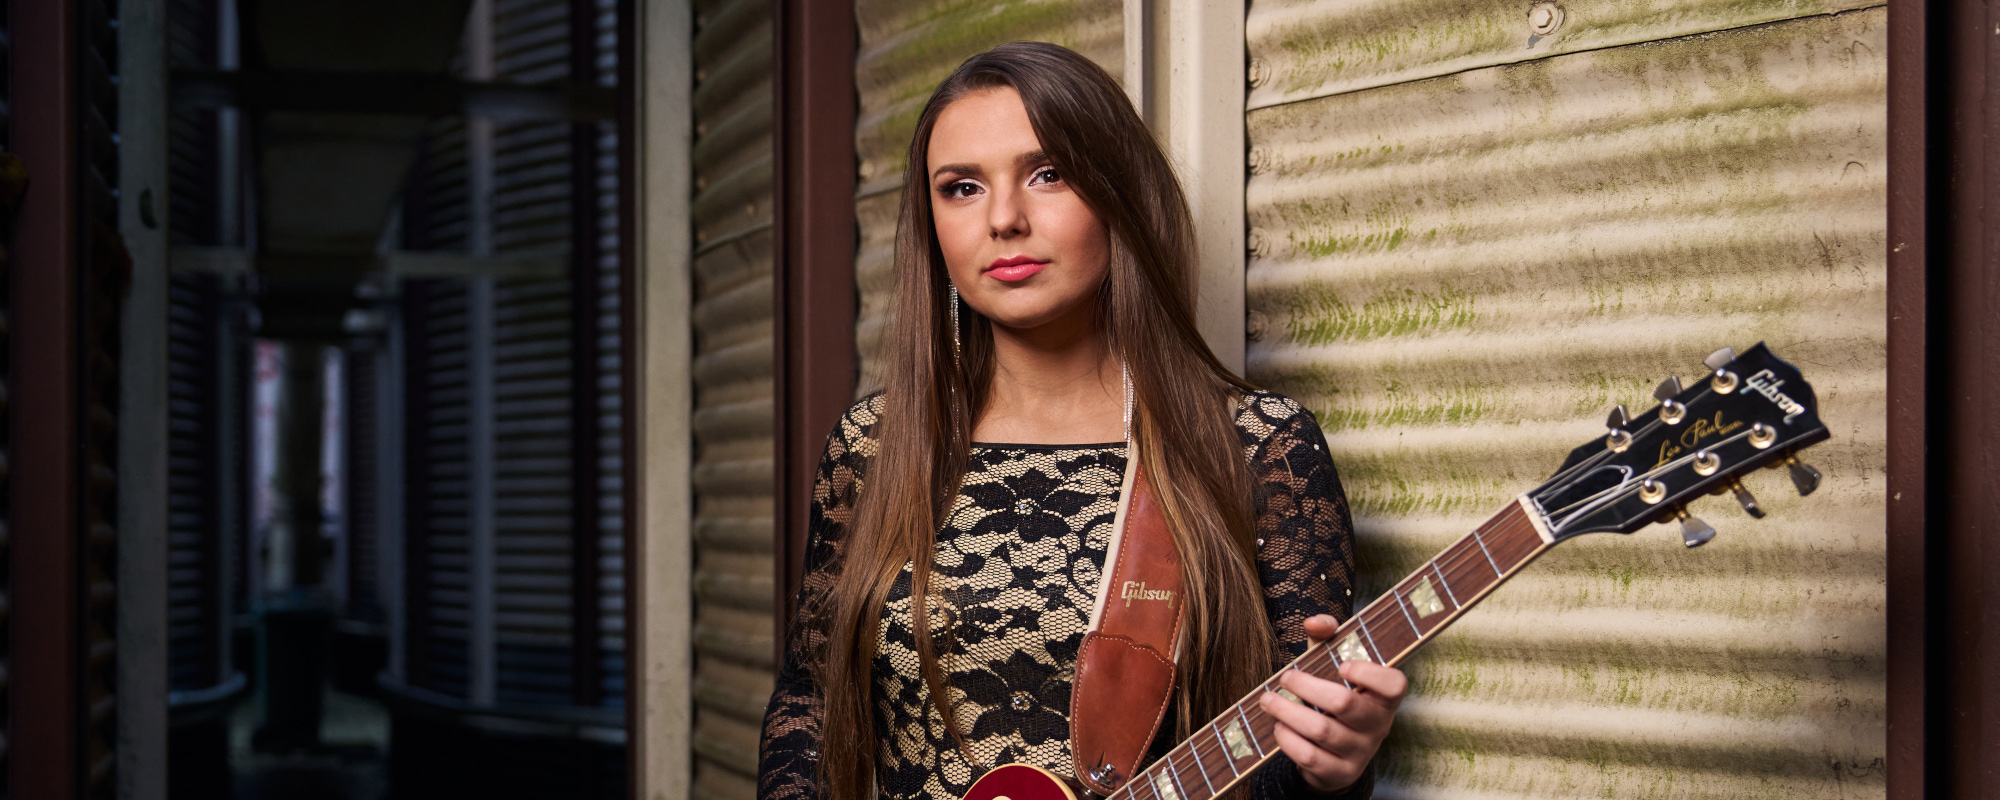 Review: Young Blues Rocker Ally Venable Diversifies and Gets ‘Real Gone’ on Fifth Album